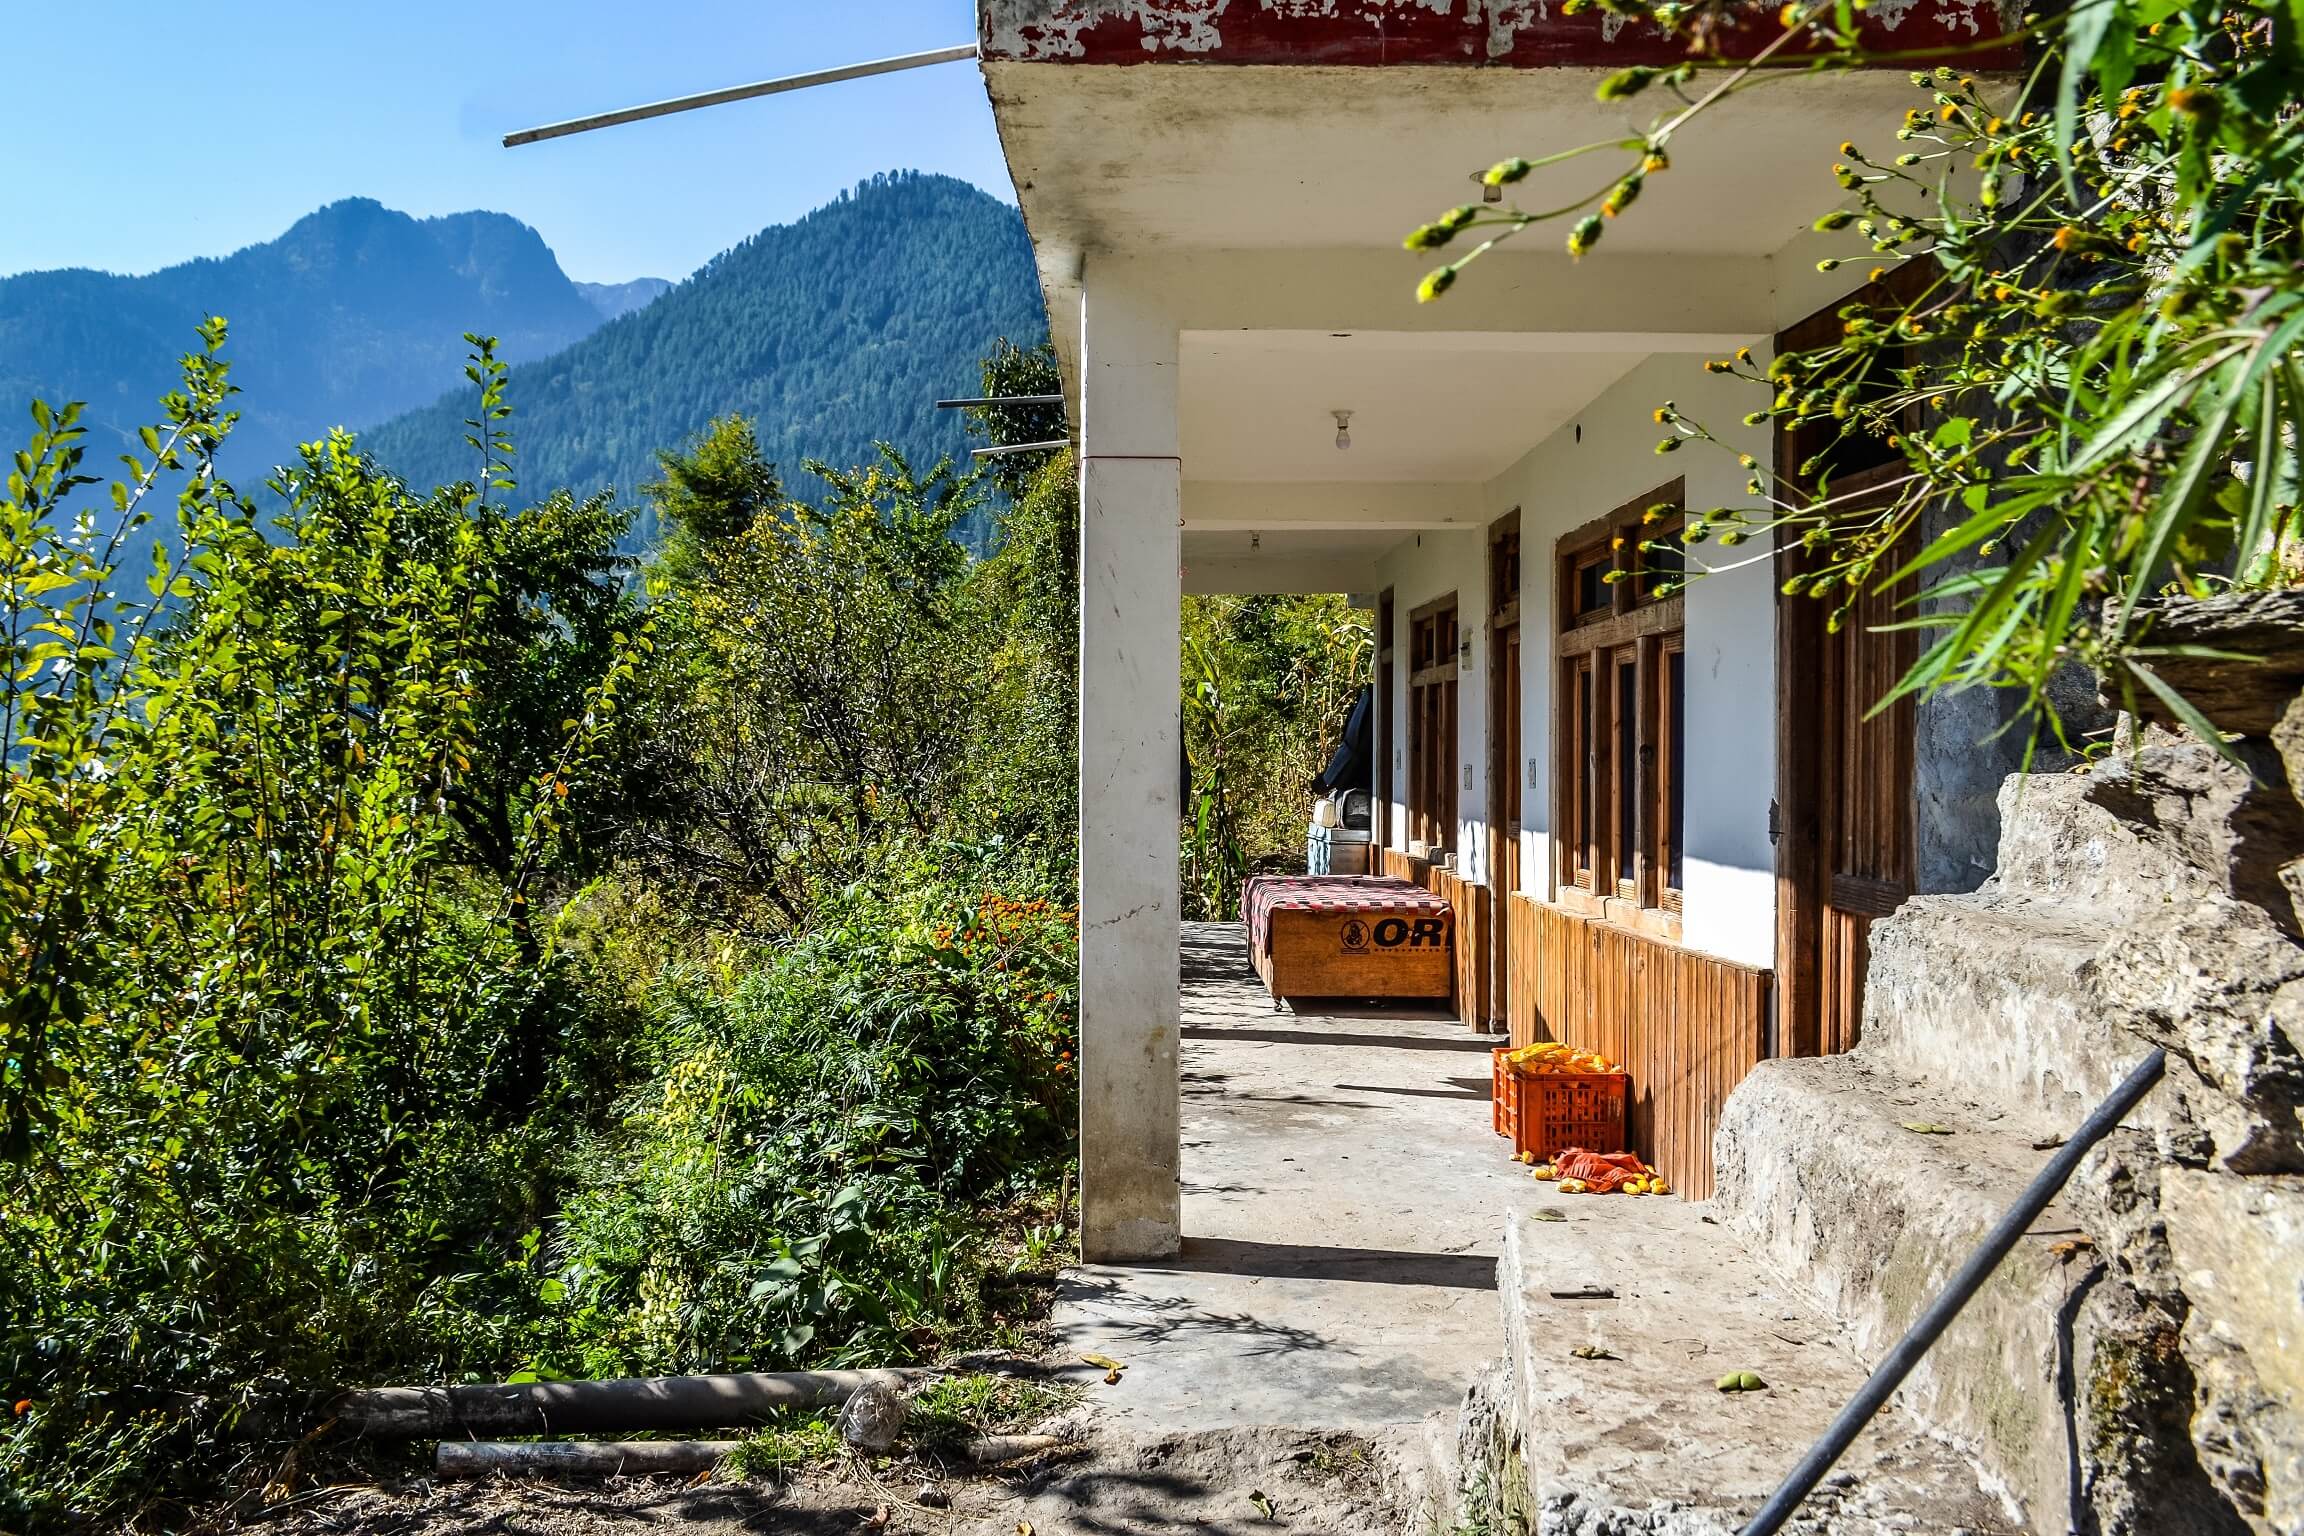 A homestay in Tirthan Valley. Himalayan Ecotourism hopes tourism will return in time to come. Photo by Stuti Bhadauria